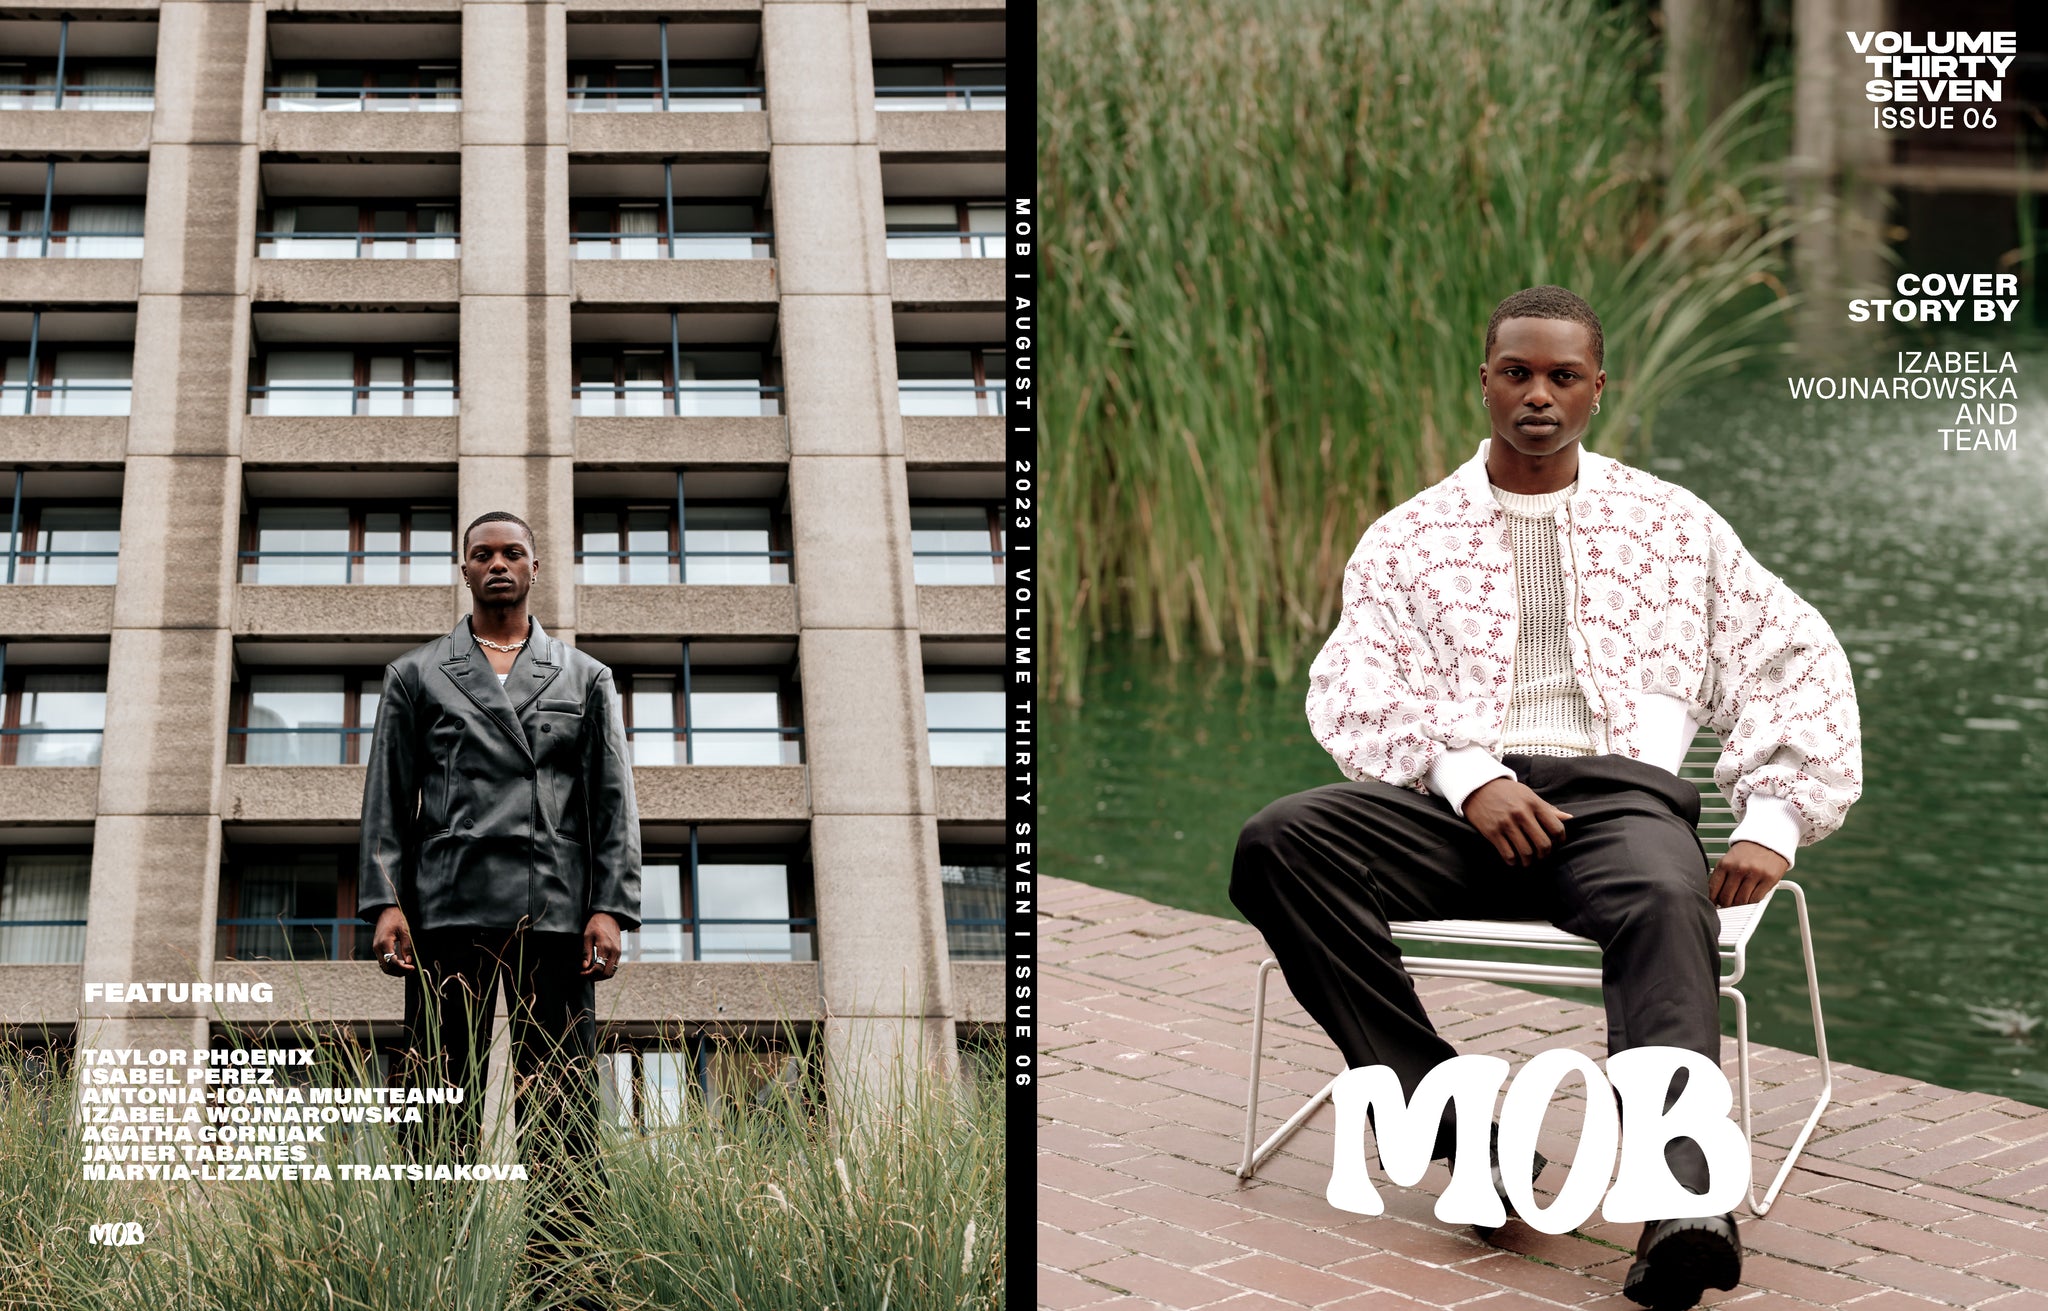 MOB JOURNAL | VOLUME THIRTY SEVEN | ISSUE #06